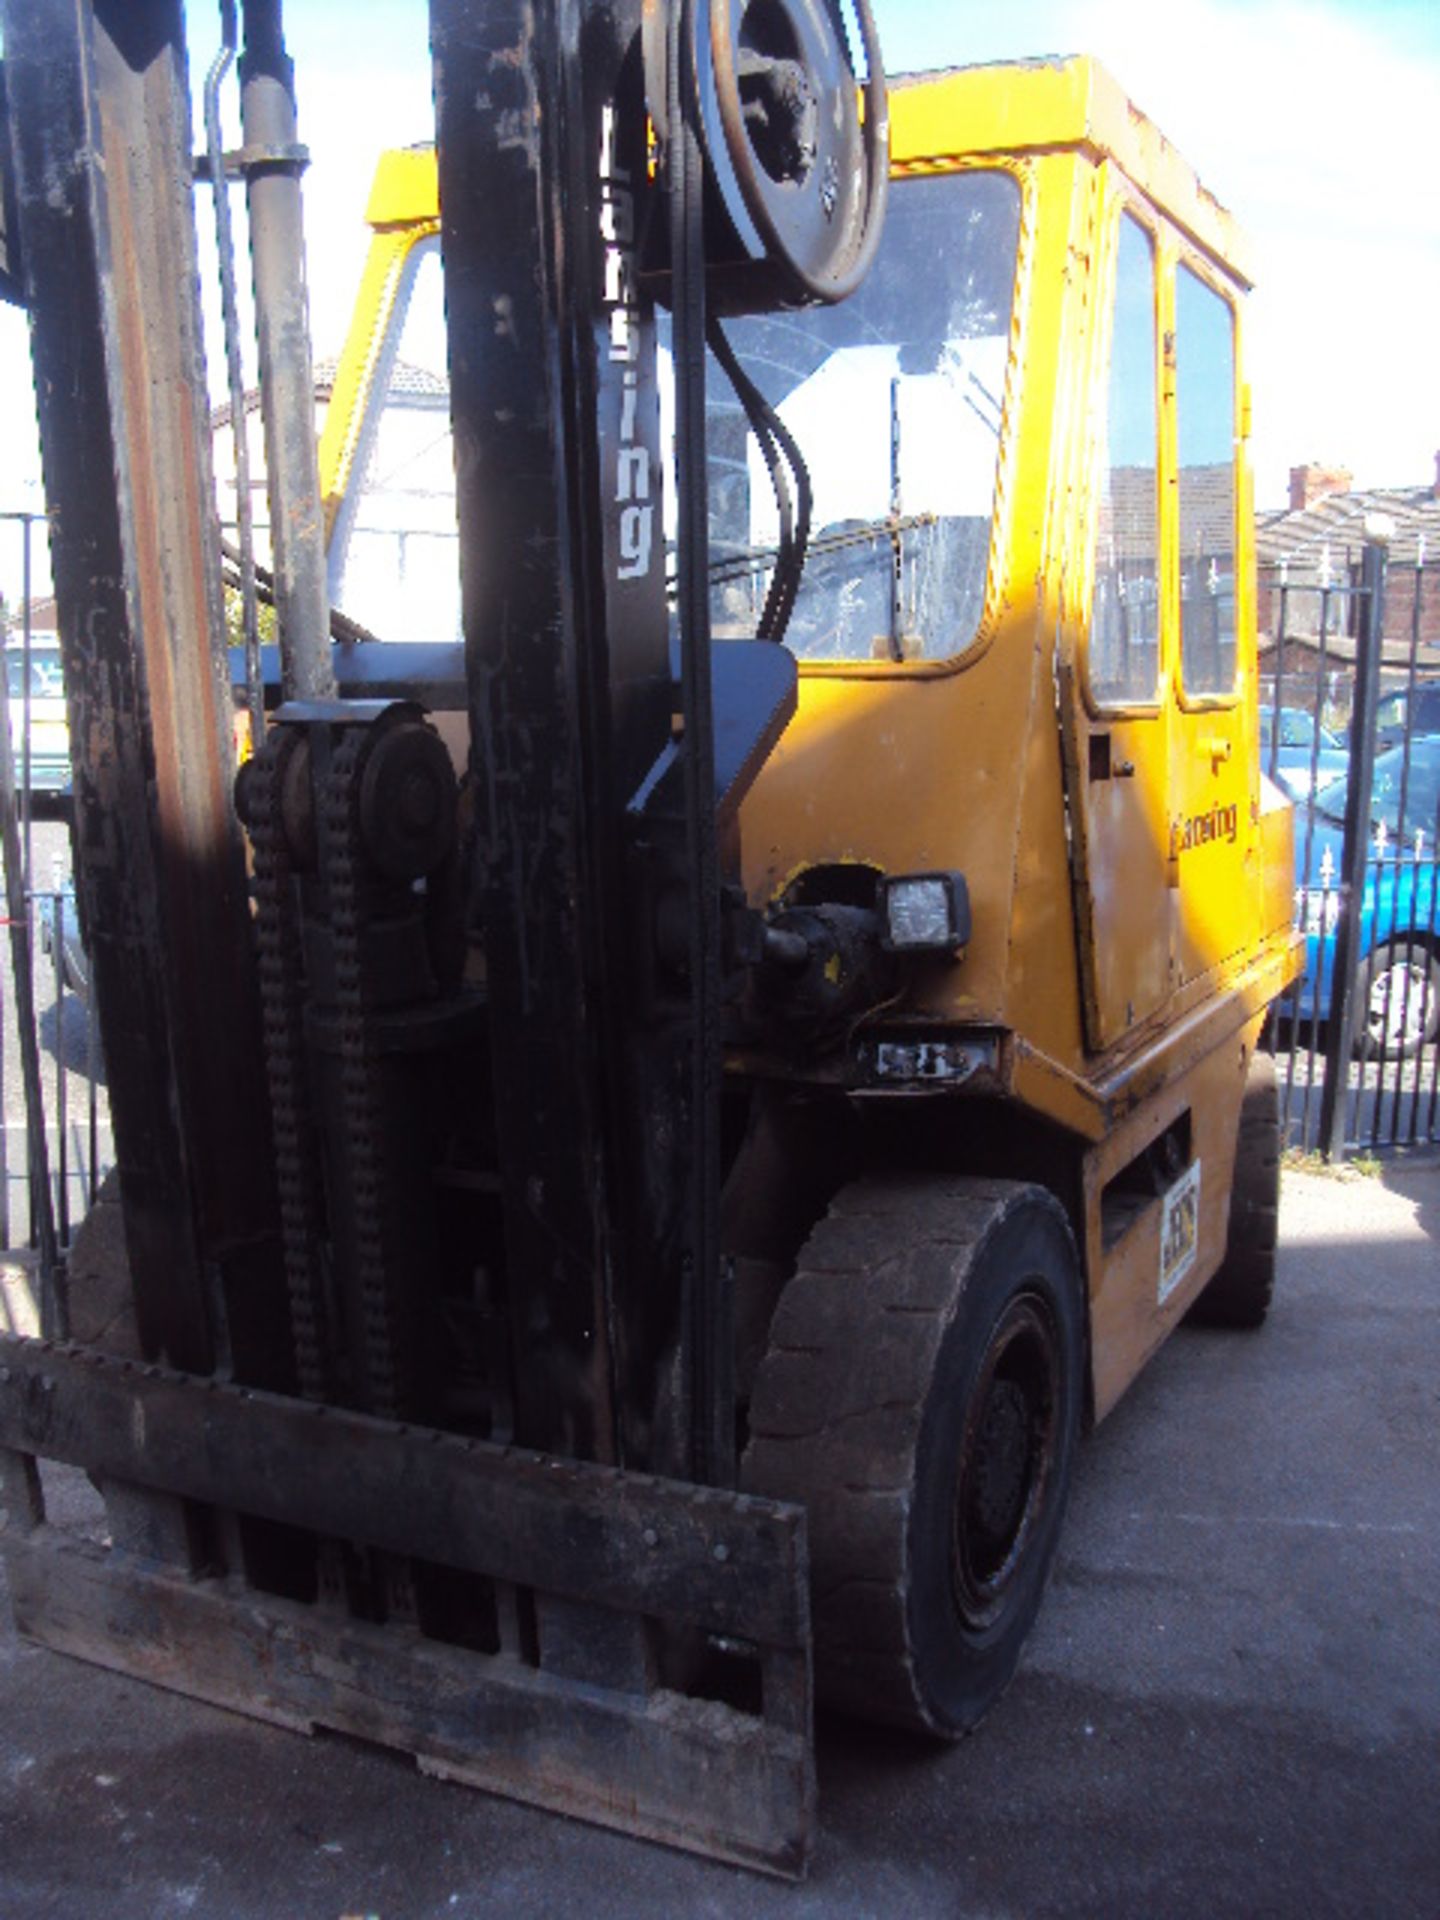 LANSING 7.40 4t diesel driven forklift truck with duplex free-lift mast (sold as not working) - Image 2 of 4